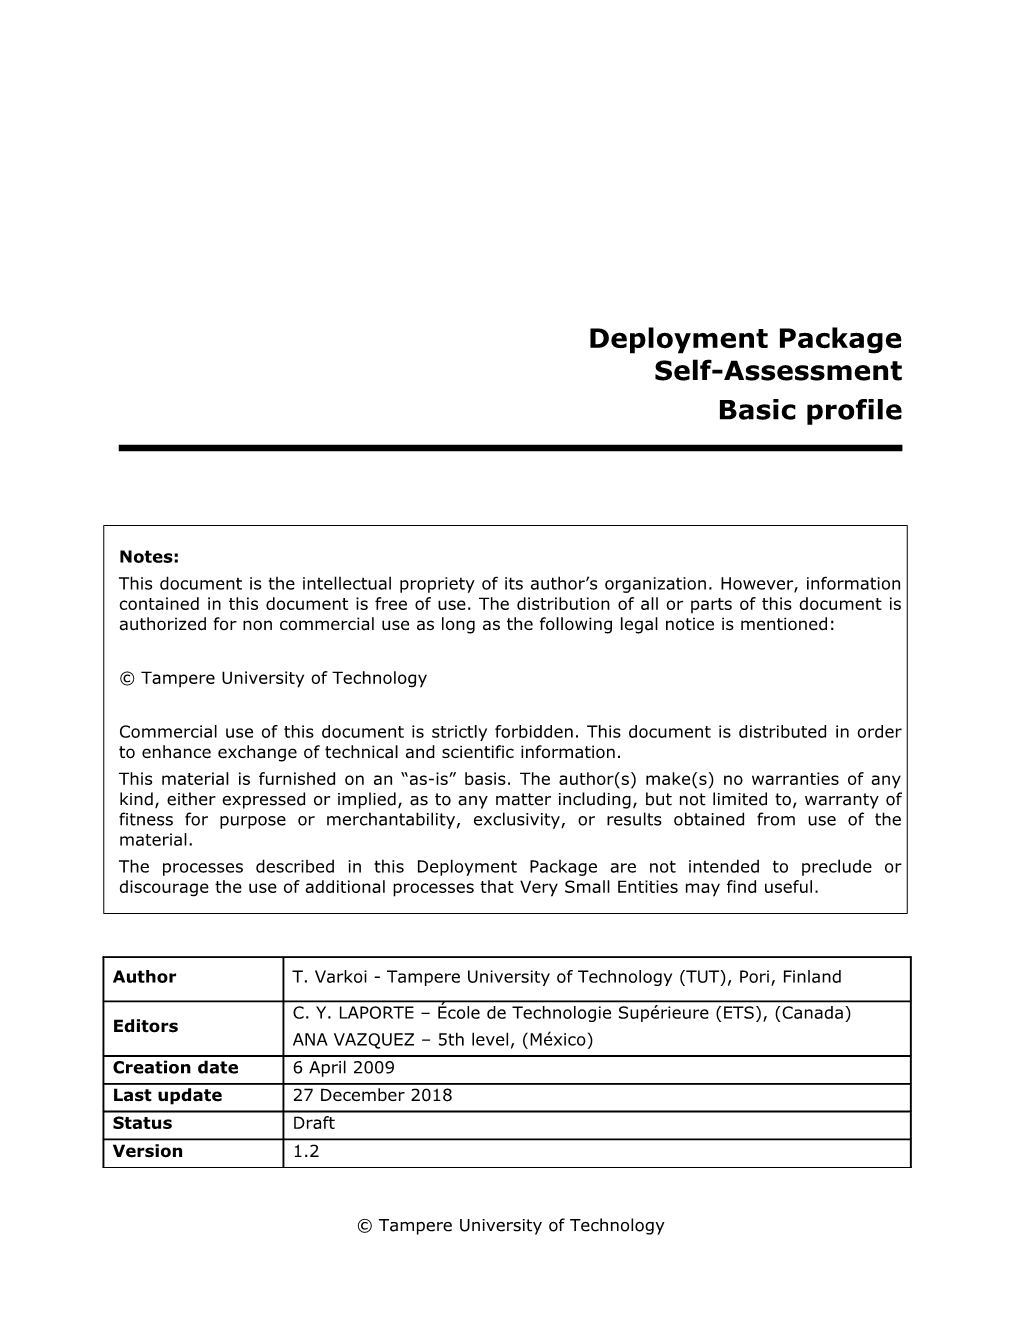 Deployment Package Self-Assessment